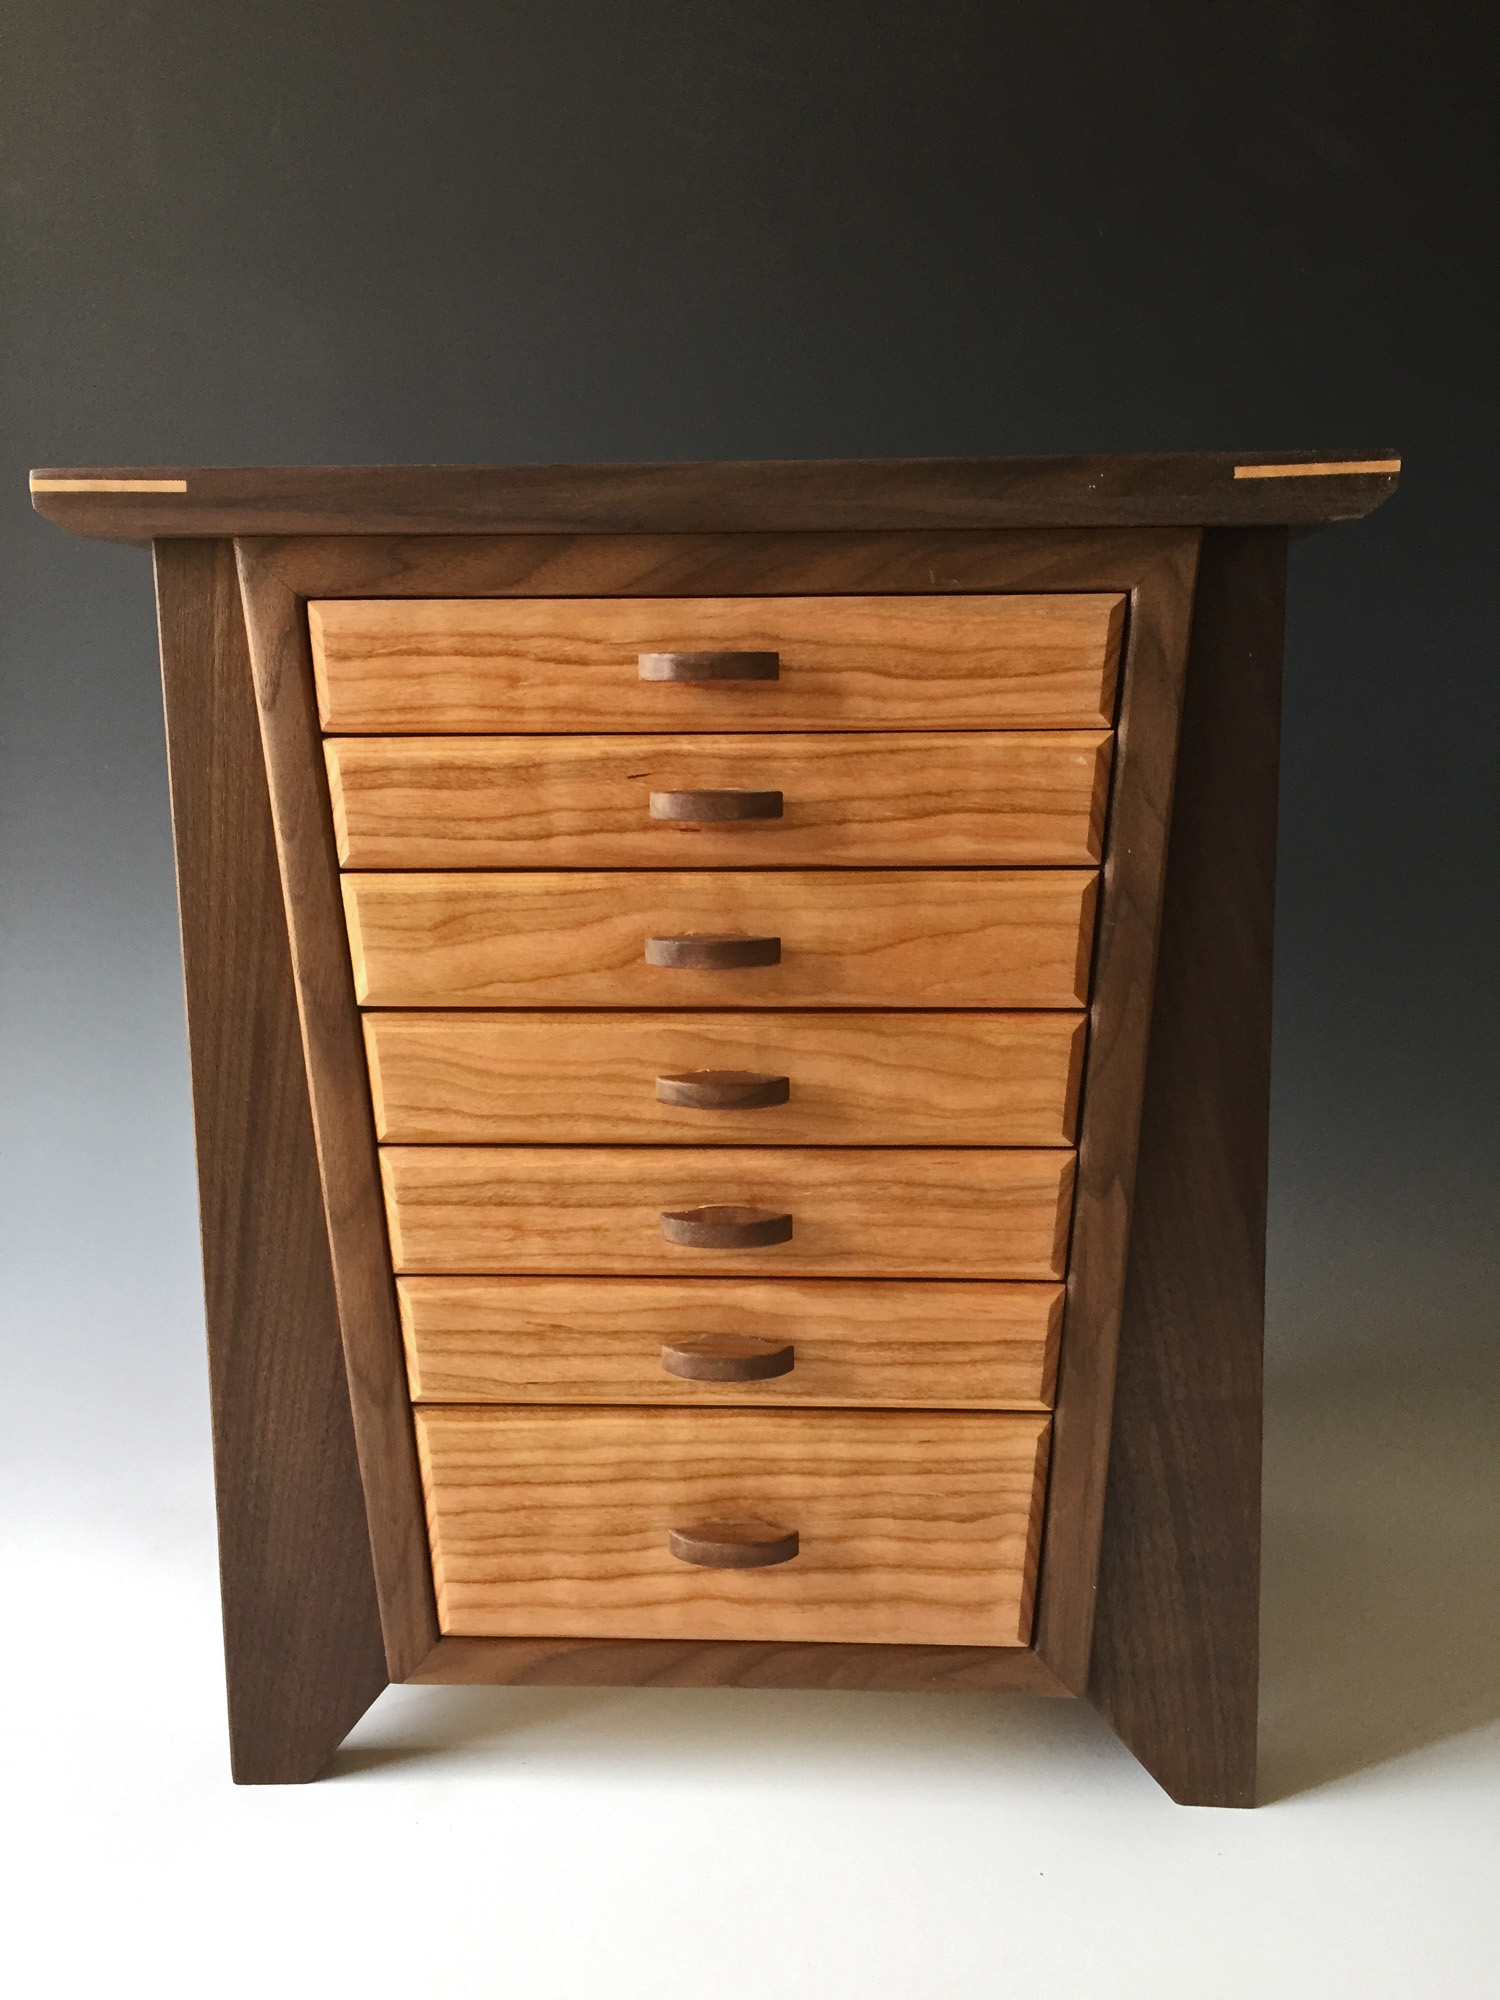  large jewelry box made of cherry wood with seven drawers for jewelry